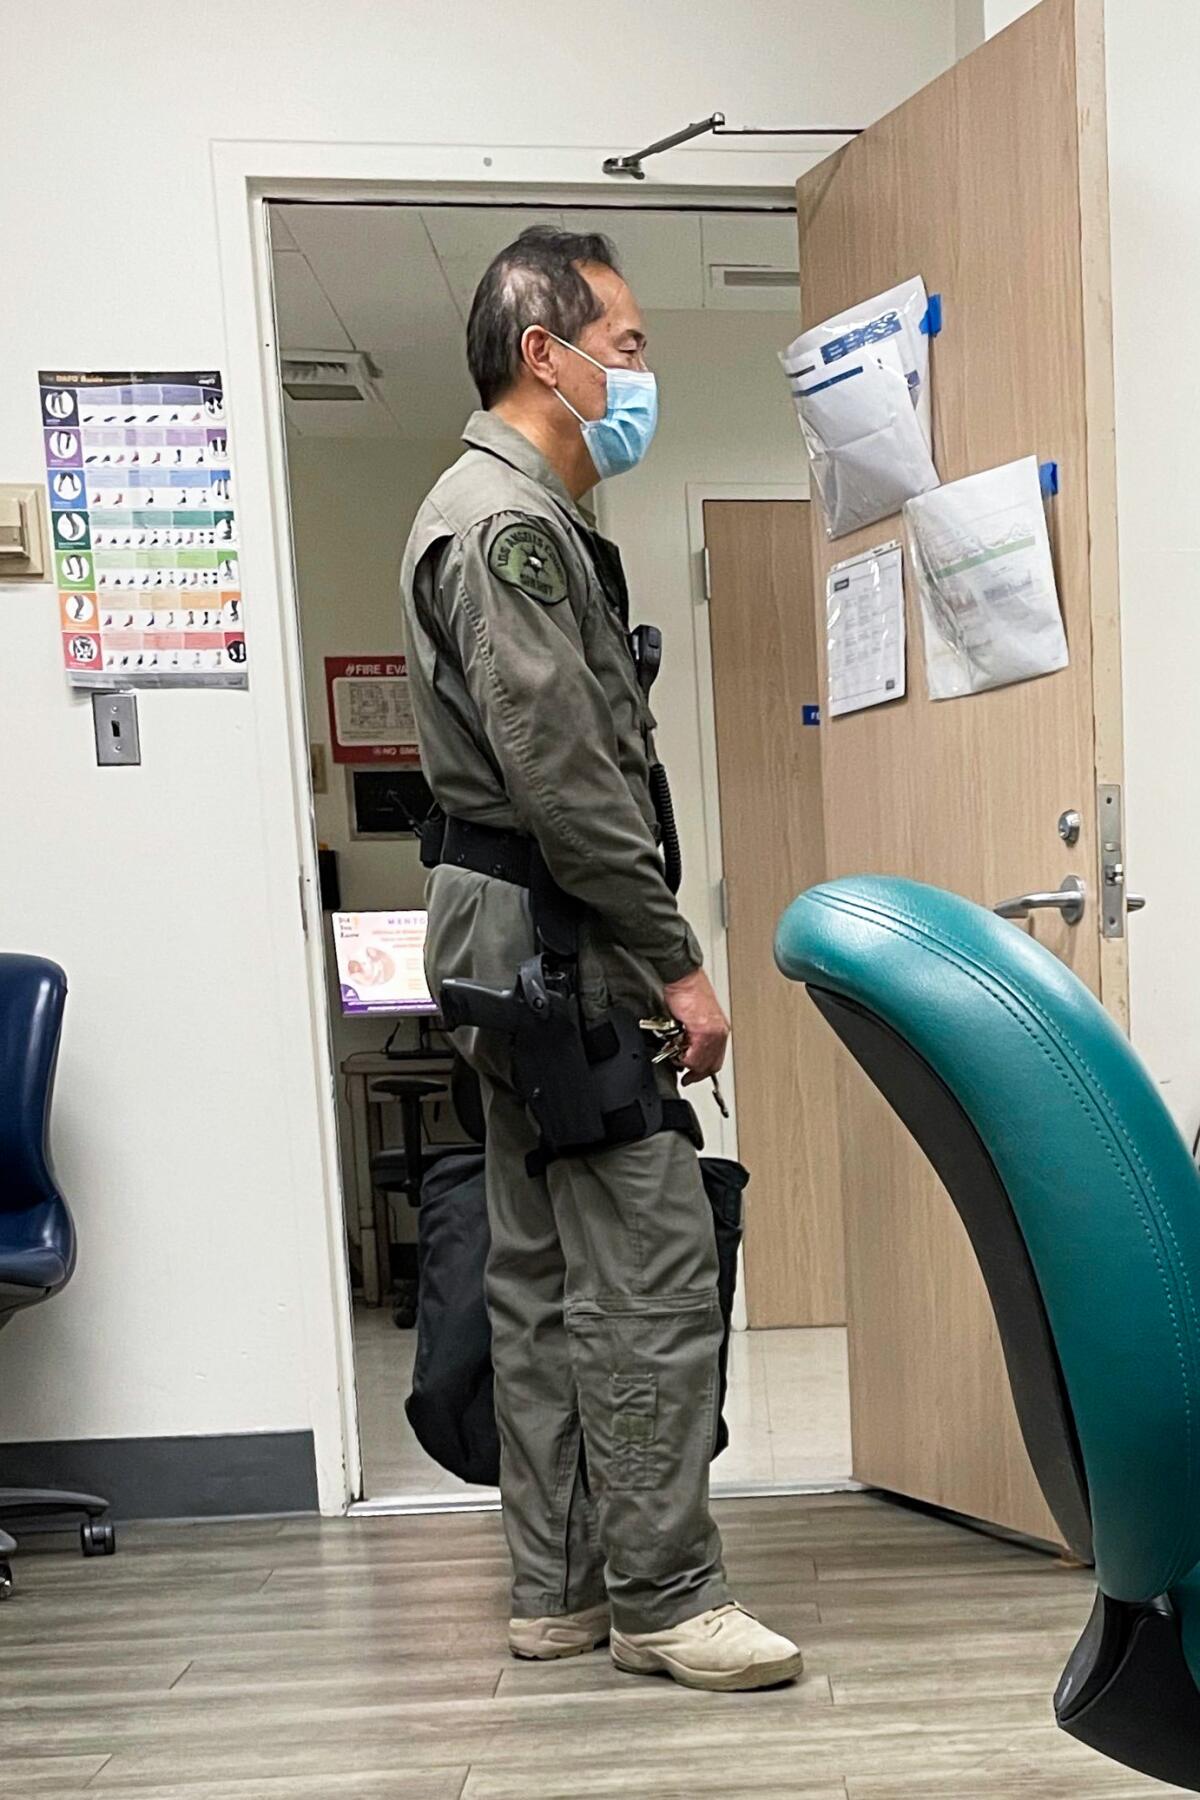 Dr. Louis Kwong stands in a doorway with a gun on his hip.